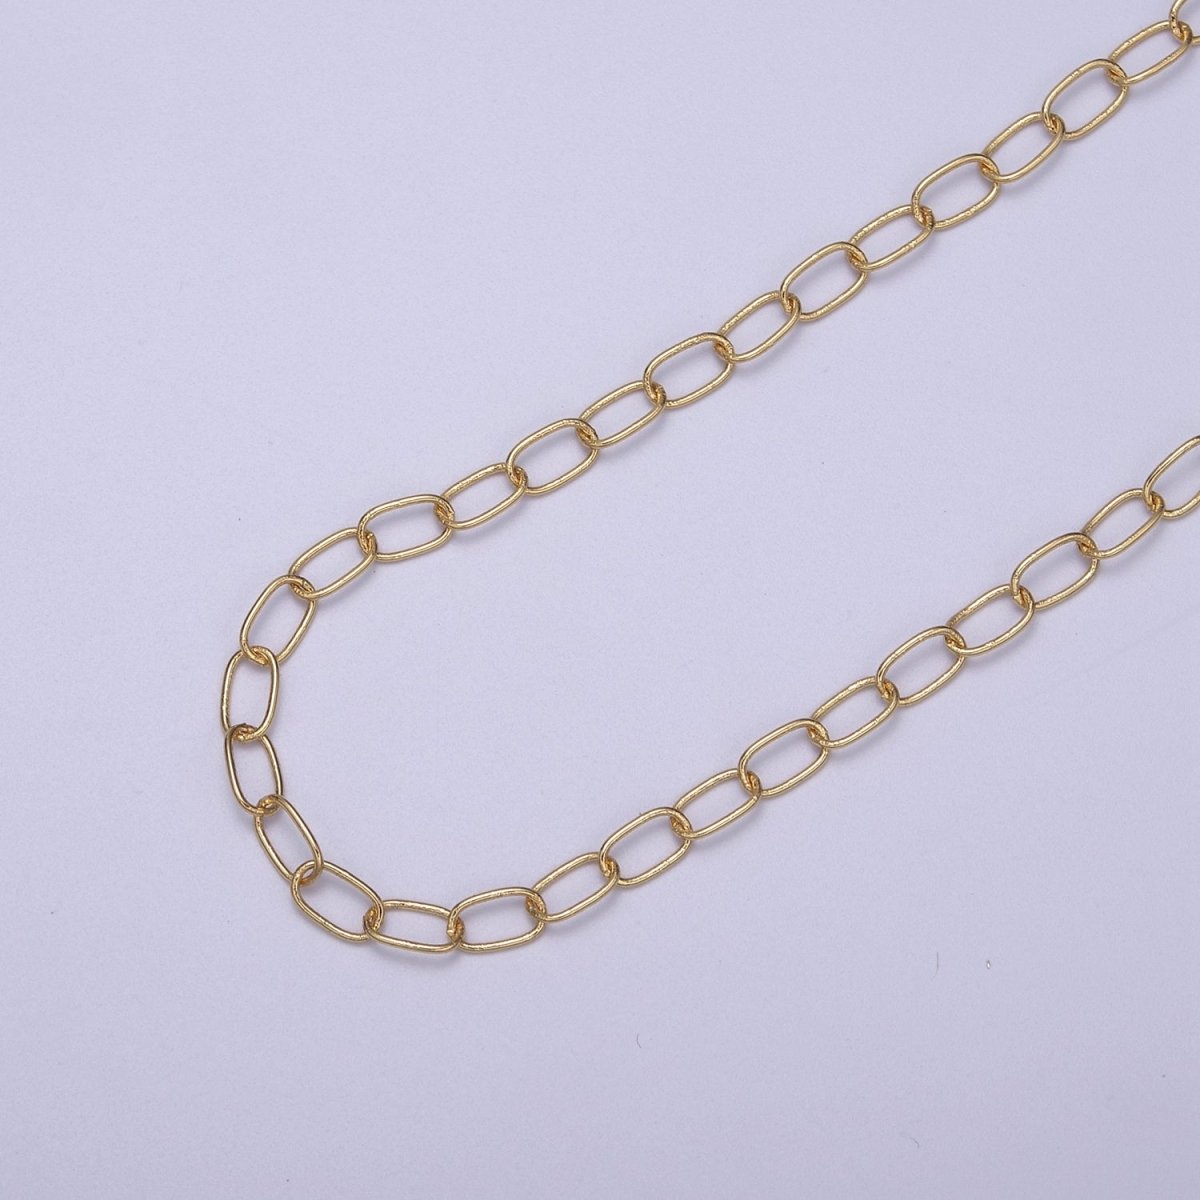 24K Gold Filled Silver Unfinished CABLE Chain, 4mm Width, Wholesale Chain For Jewelry Making | ROLL-617, ROLL-618 Clearance Pricing - DLUXCA